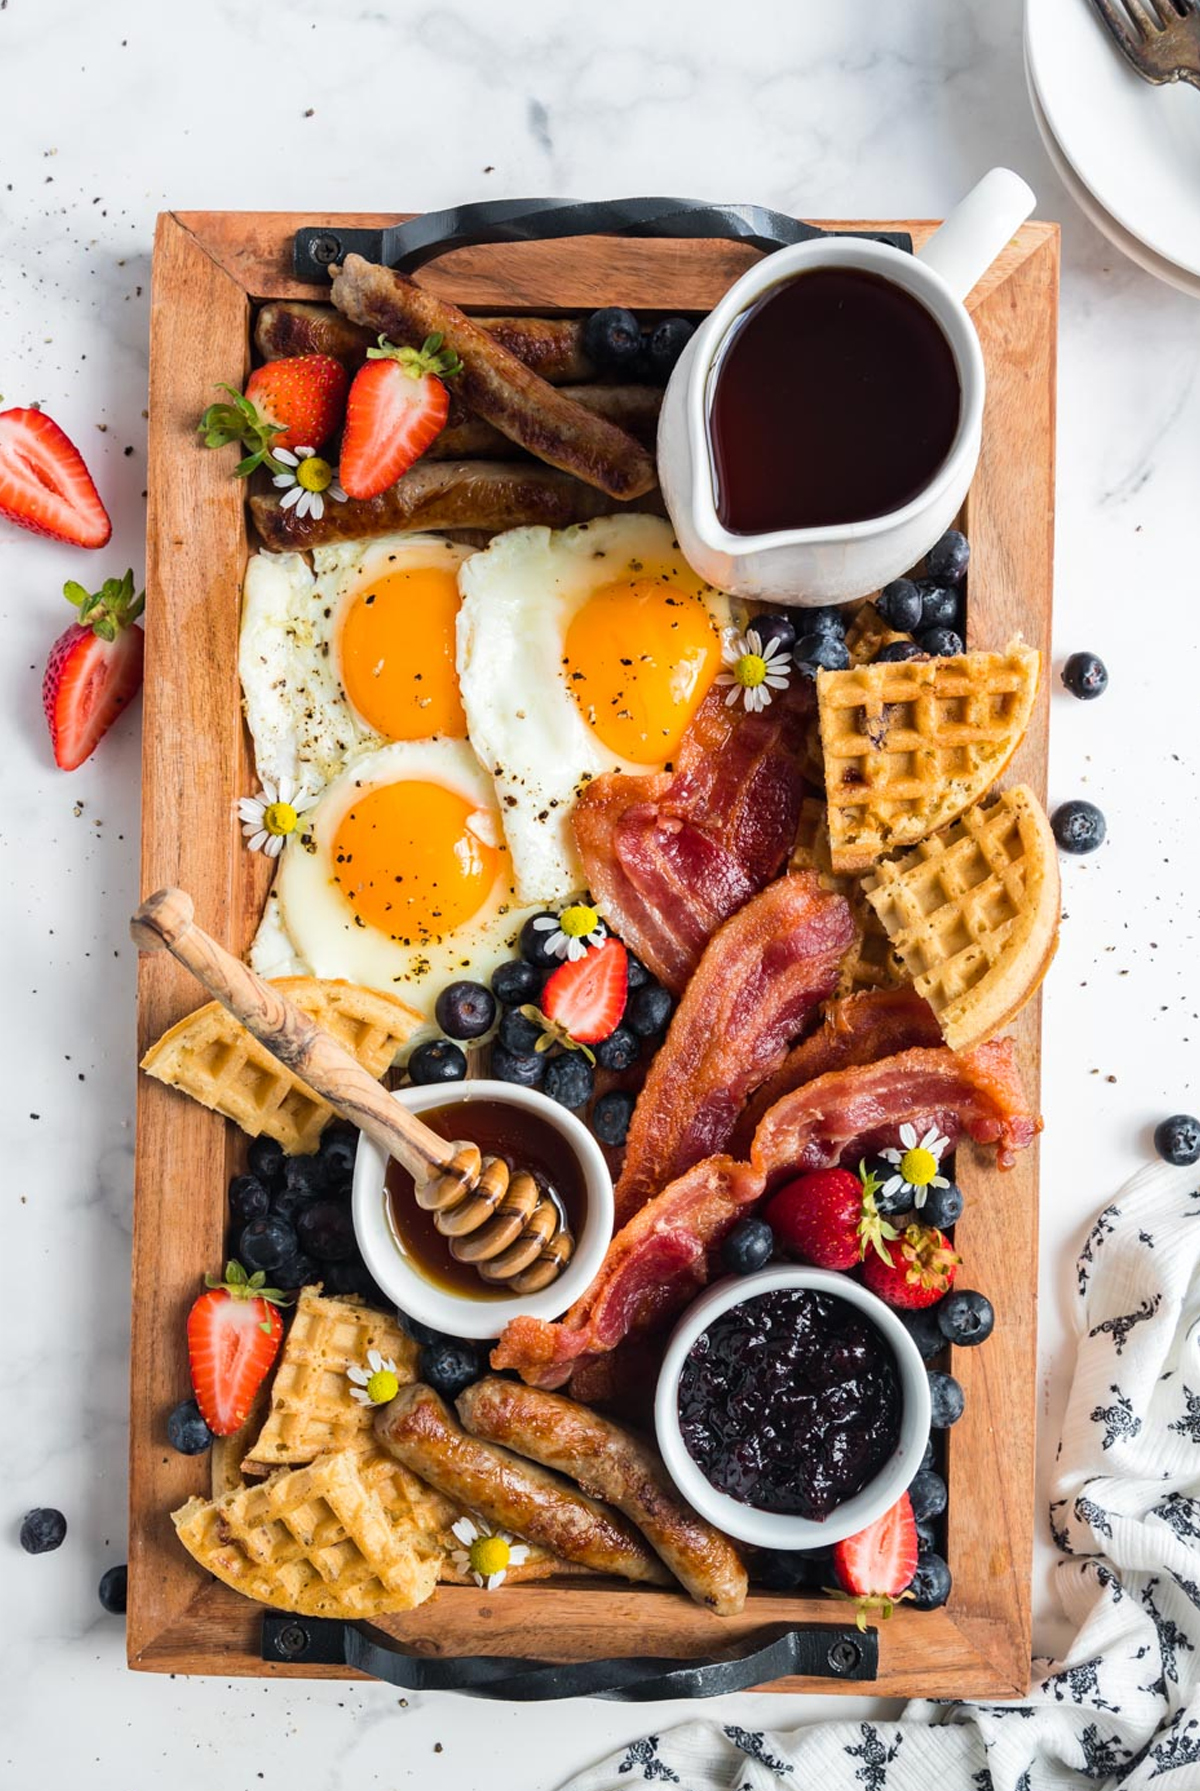 bacon, sausage, eggs and waffles make the perfect board from feast and farm.